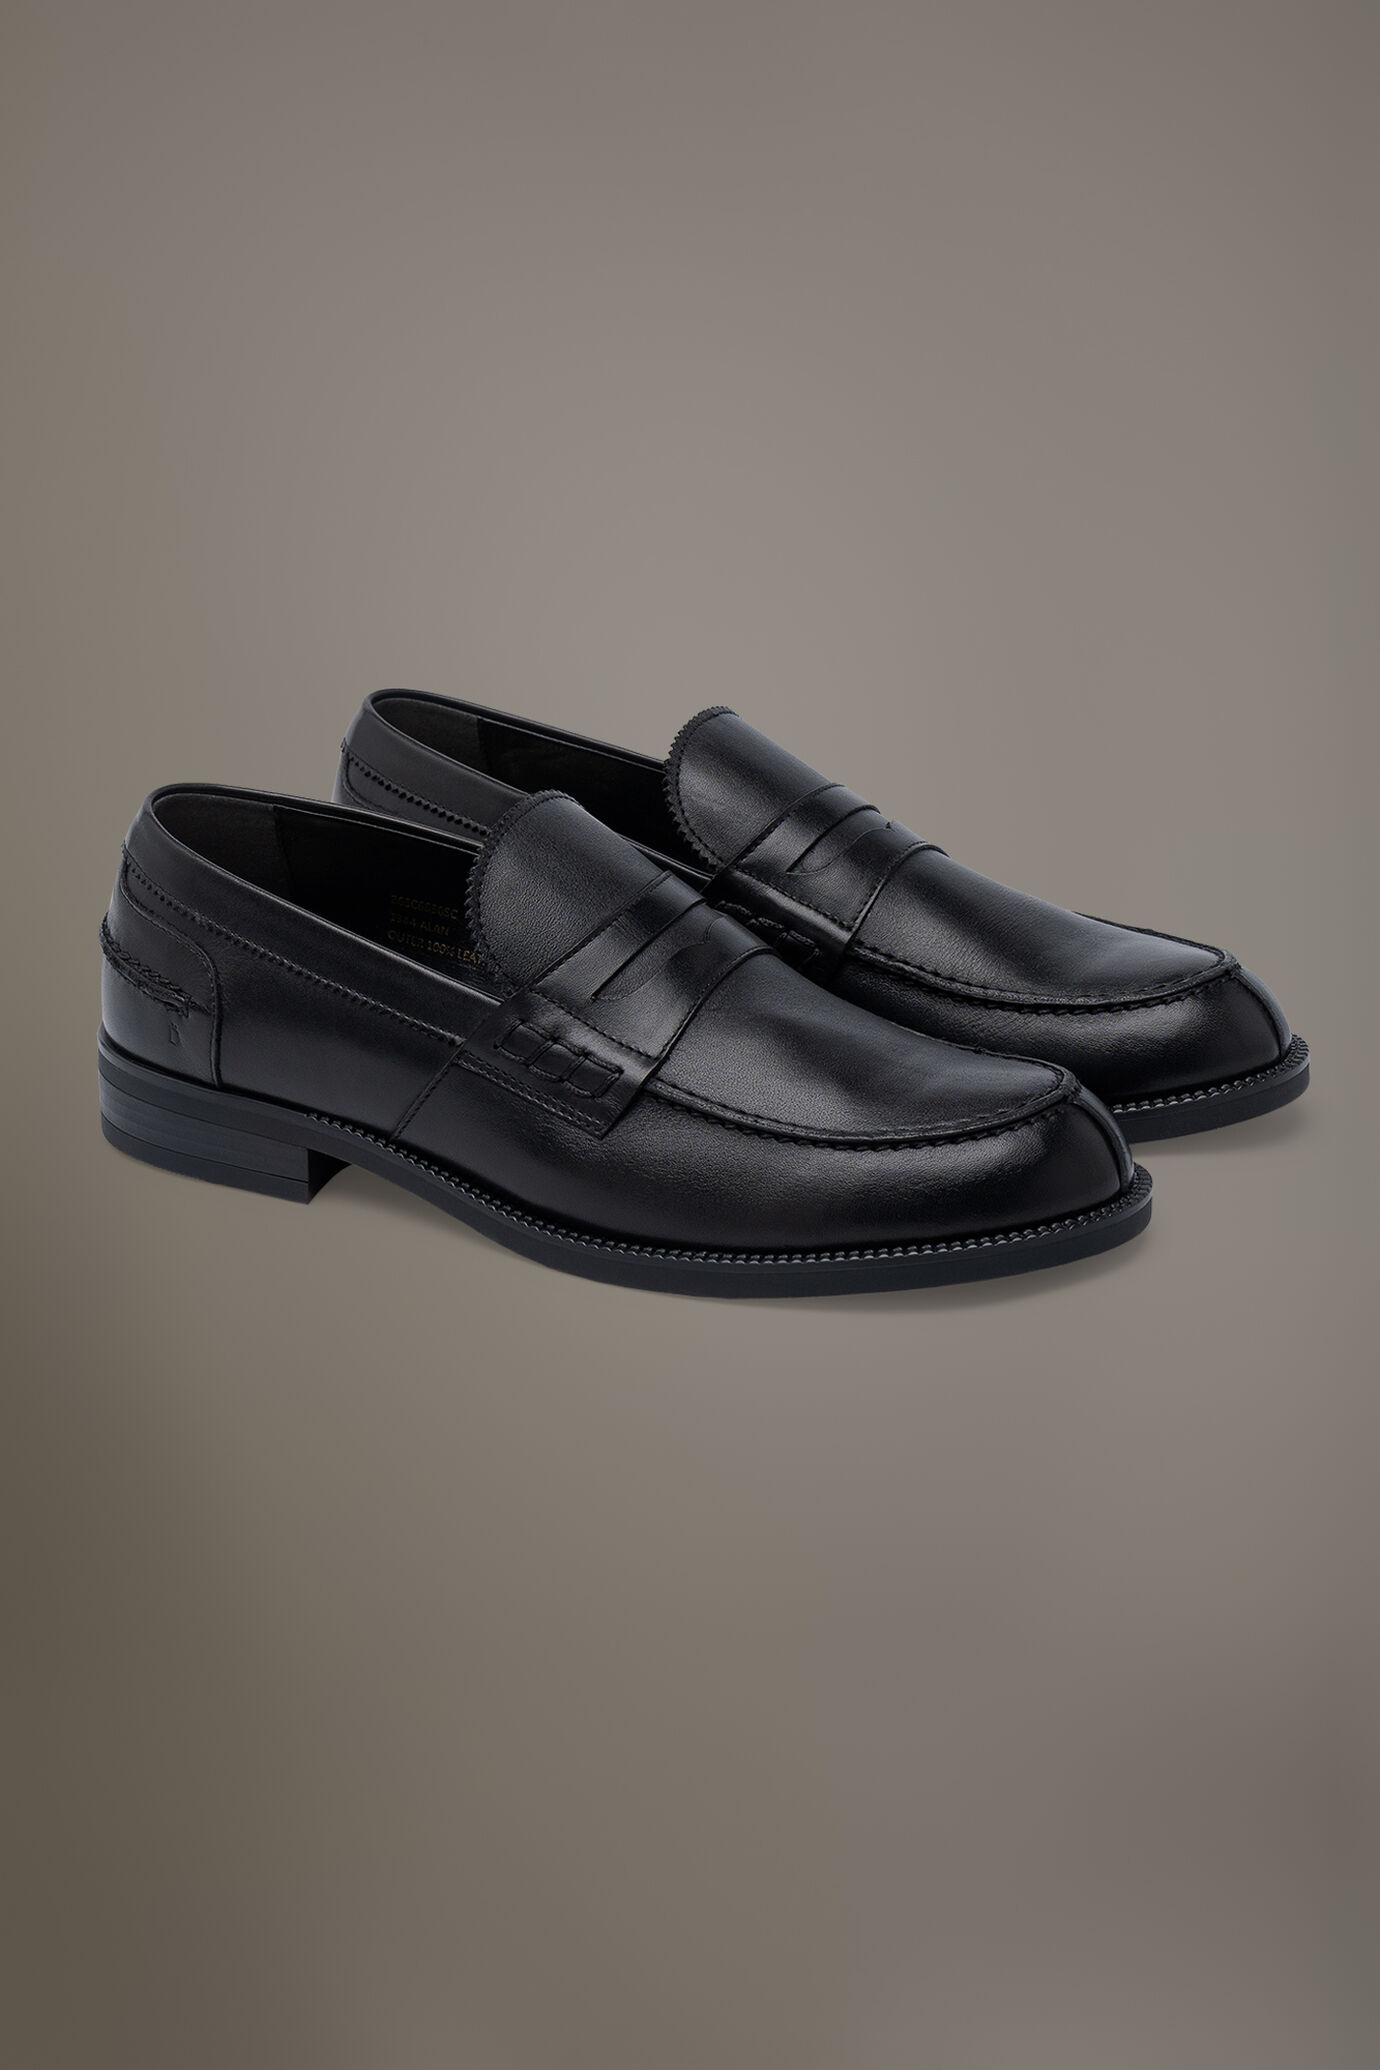 Loafer shoes 100% leather with rubber sole